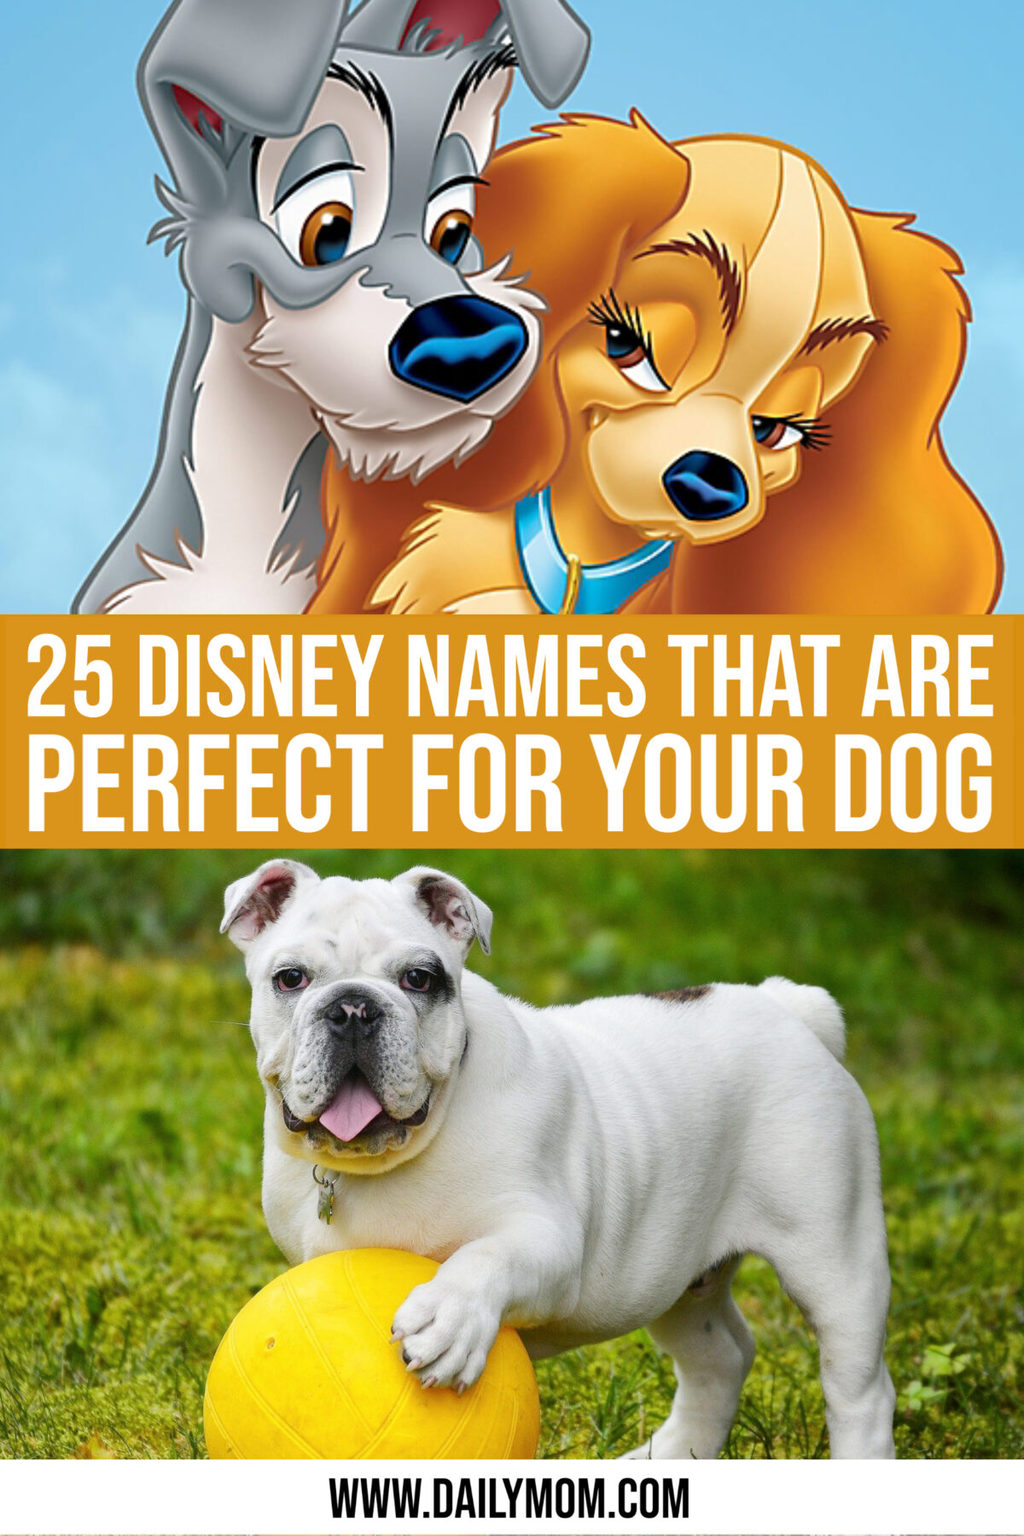 25 Underrated Disney Names For Dogs You’Ll Definitely Want To Use